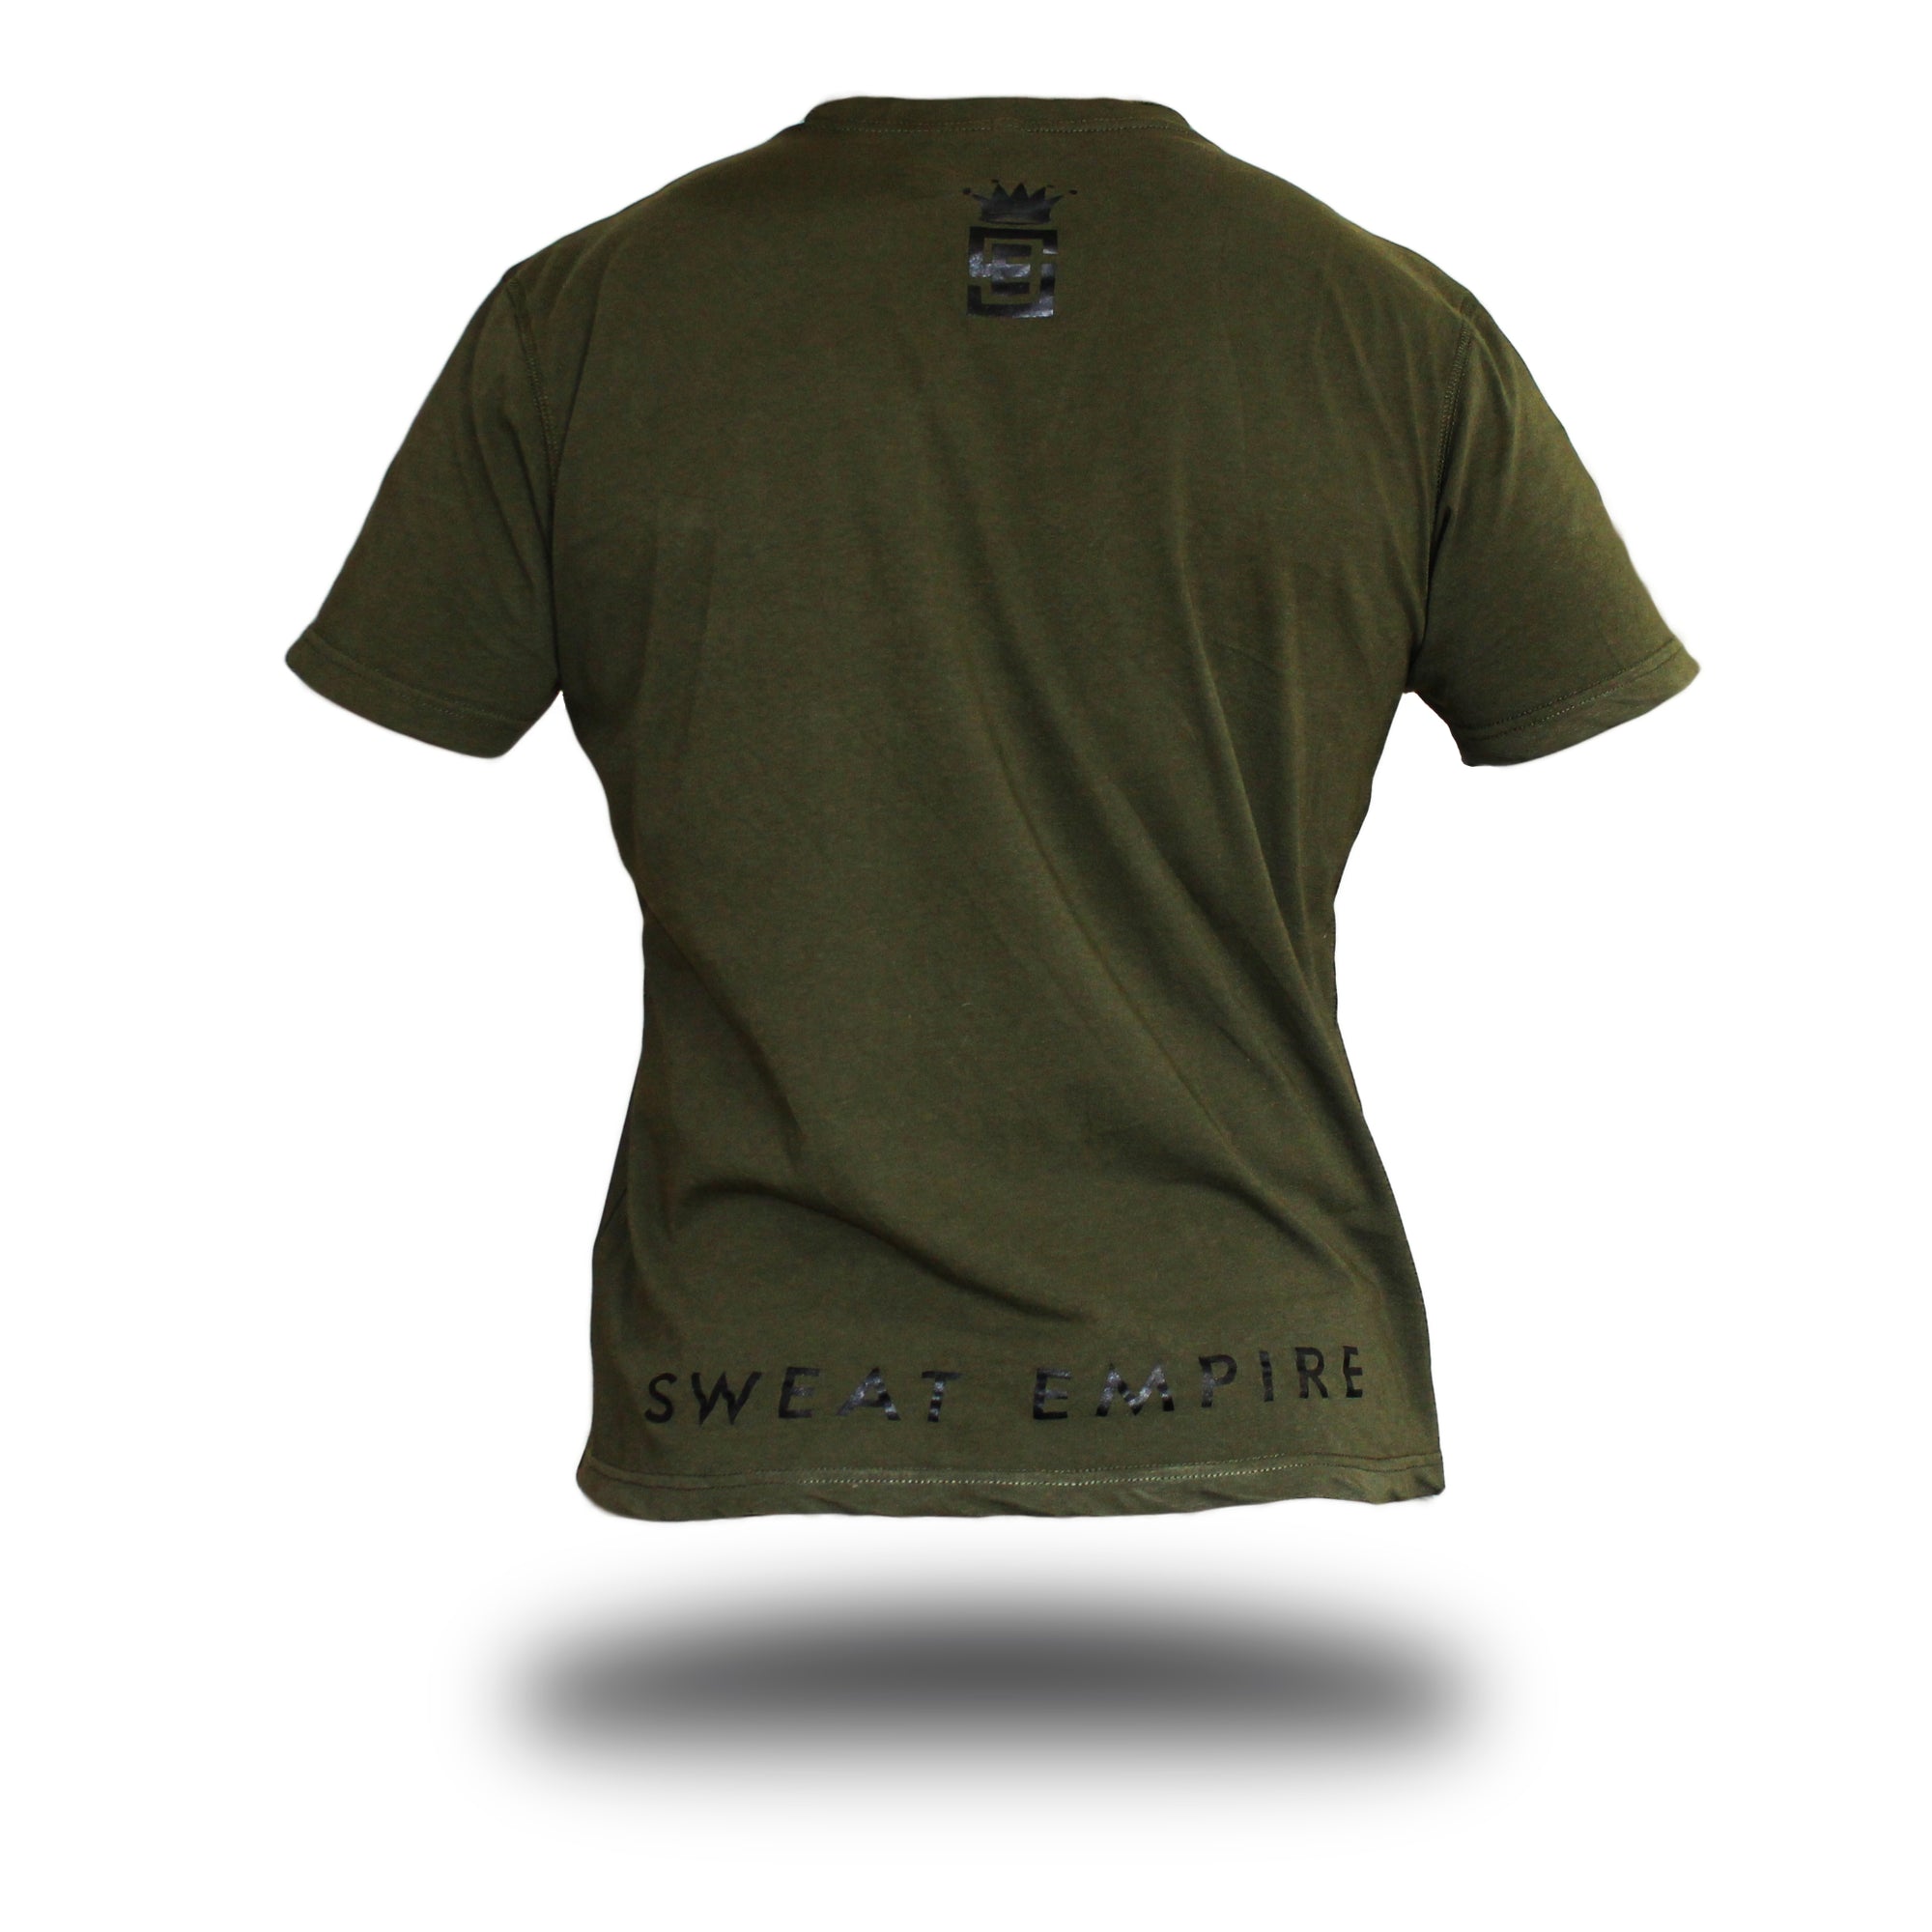 Unisex Olive Tee black wire frame print front